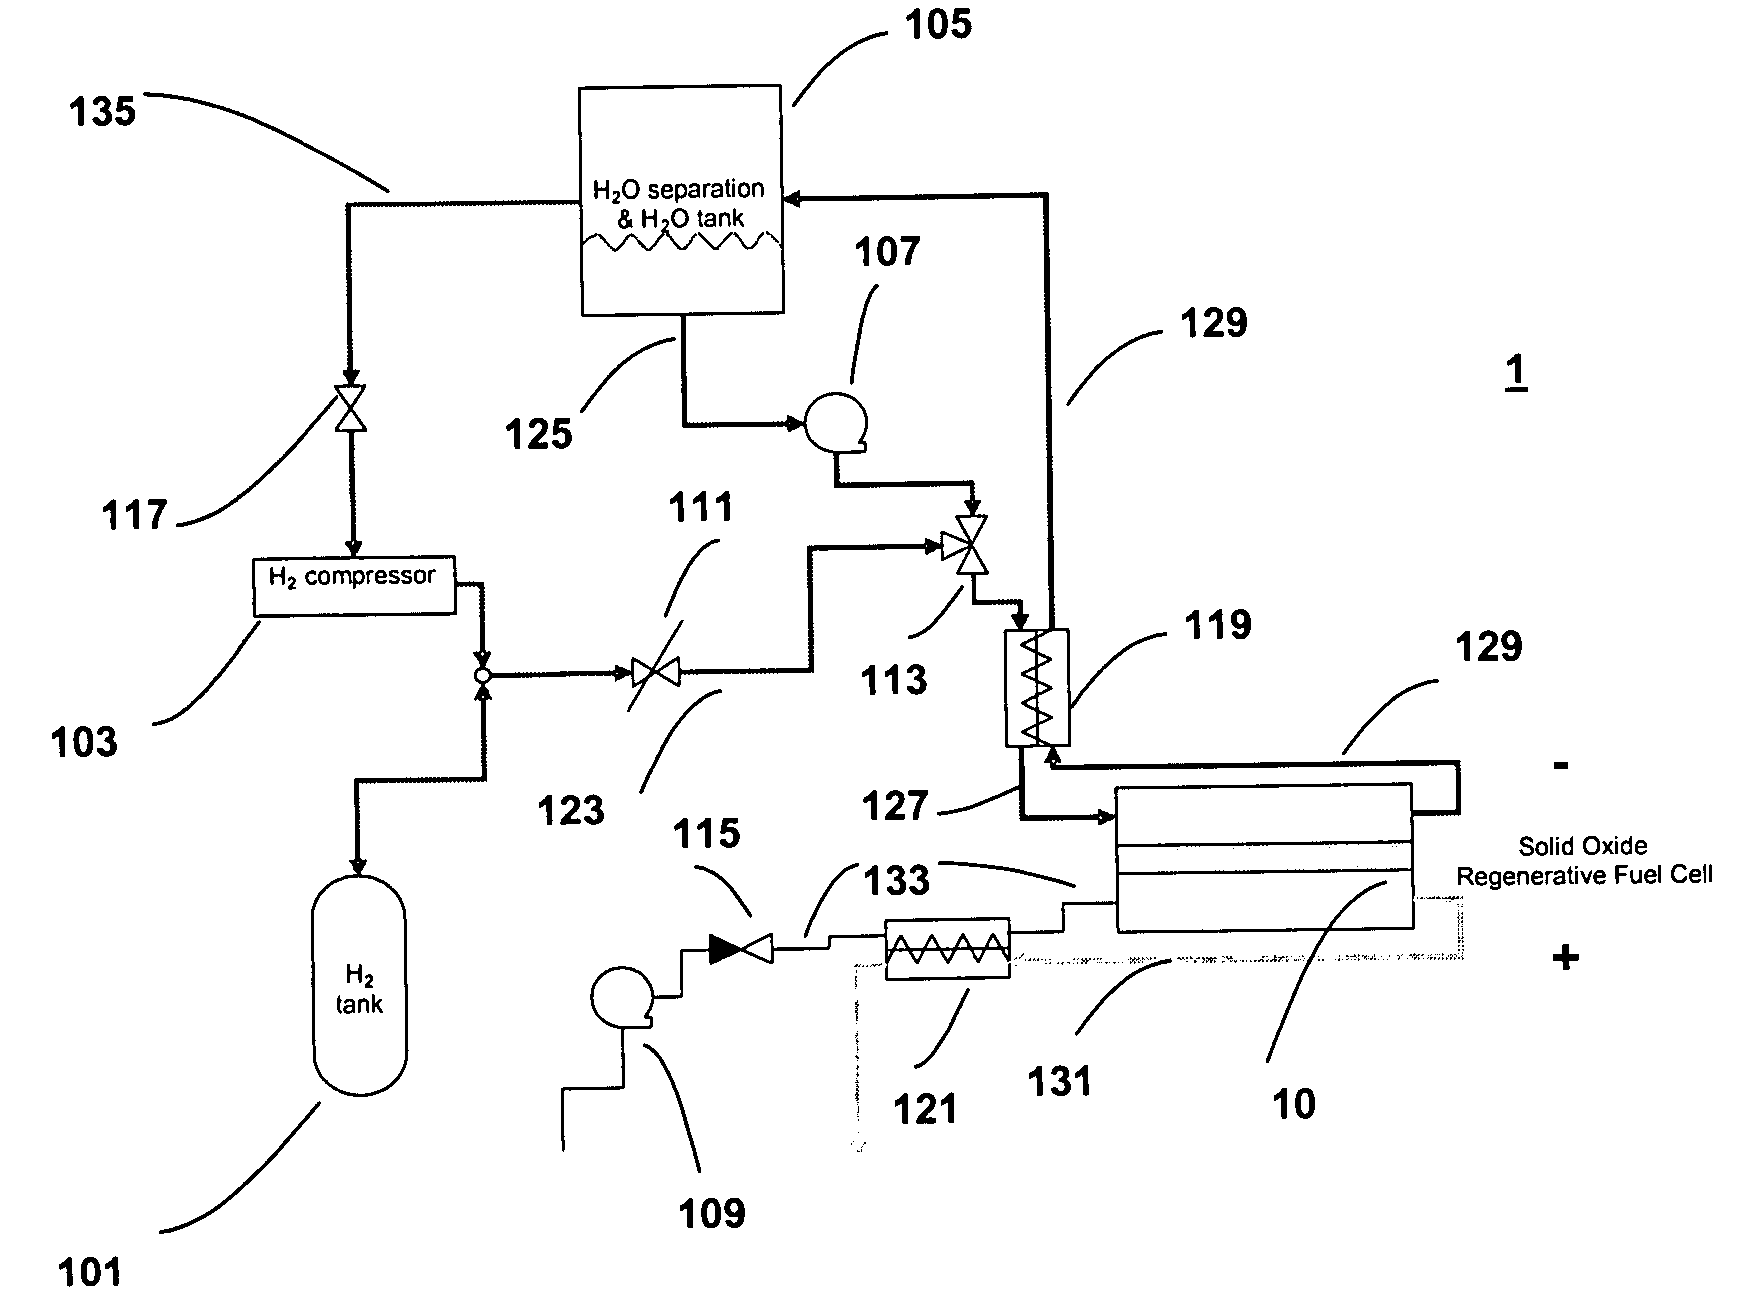 SORFC system with non-noble metal electrode compositions